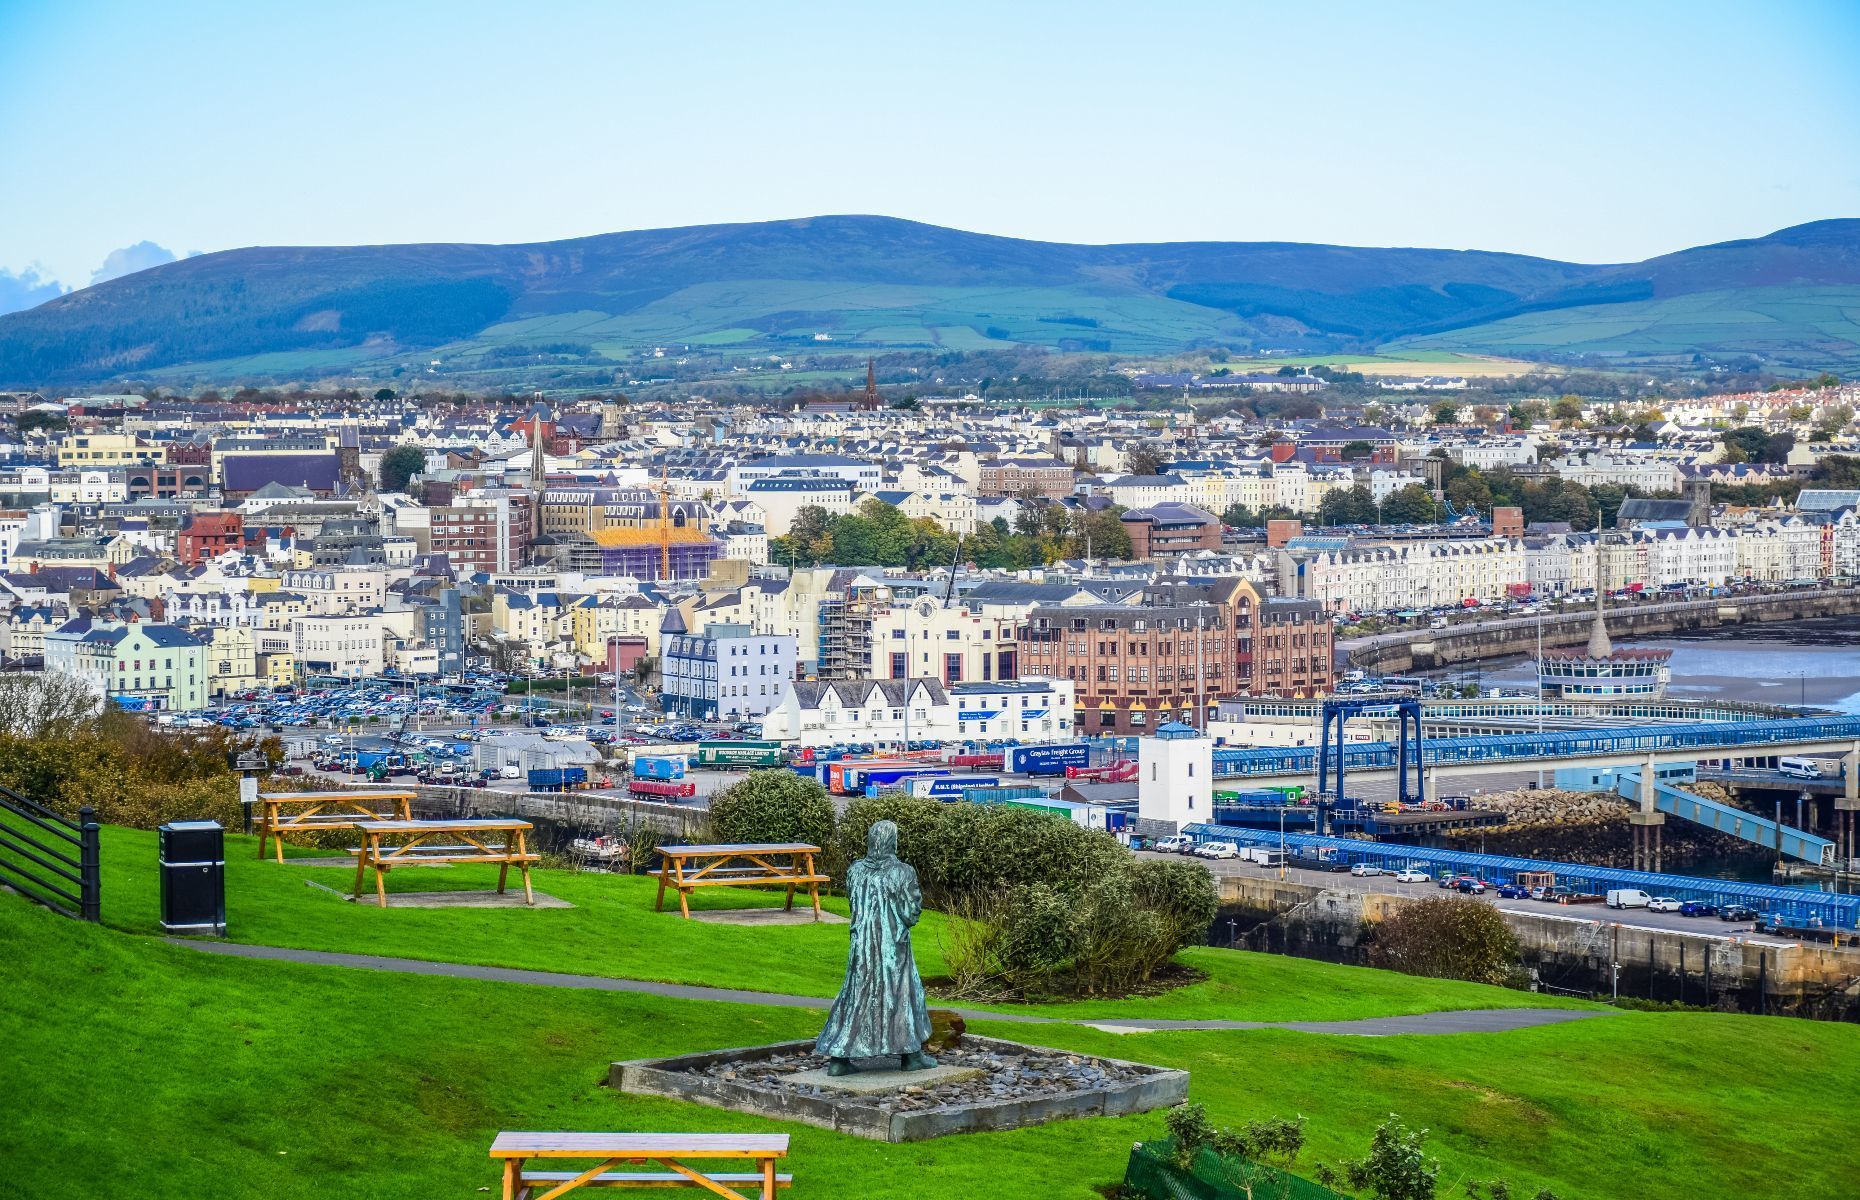 <p>The best part about the Isle of Man, a self-governing Crown dependency located between Ireland and Great Britain in the Irish Sea, is that it’s small enough to explore in a single day, from <a href="https://www.visitisleofman.com/things-to-do/attractions/landmarks" rel="noreferrer noopener">The Sound and Calf of Man to Snaefell Mountain</a>. The island is famous for its annual <a href="https://www.iomtt.com/" rel="noreferrer noopener">Tourist Trophy</a> motorcycle race, typically held in May or June.</p>